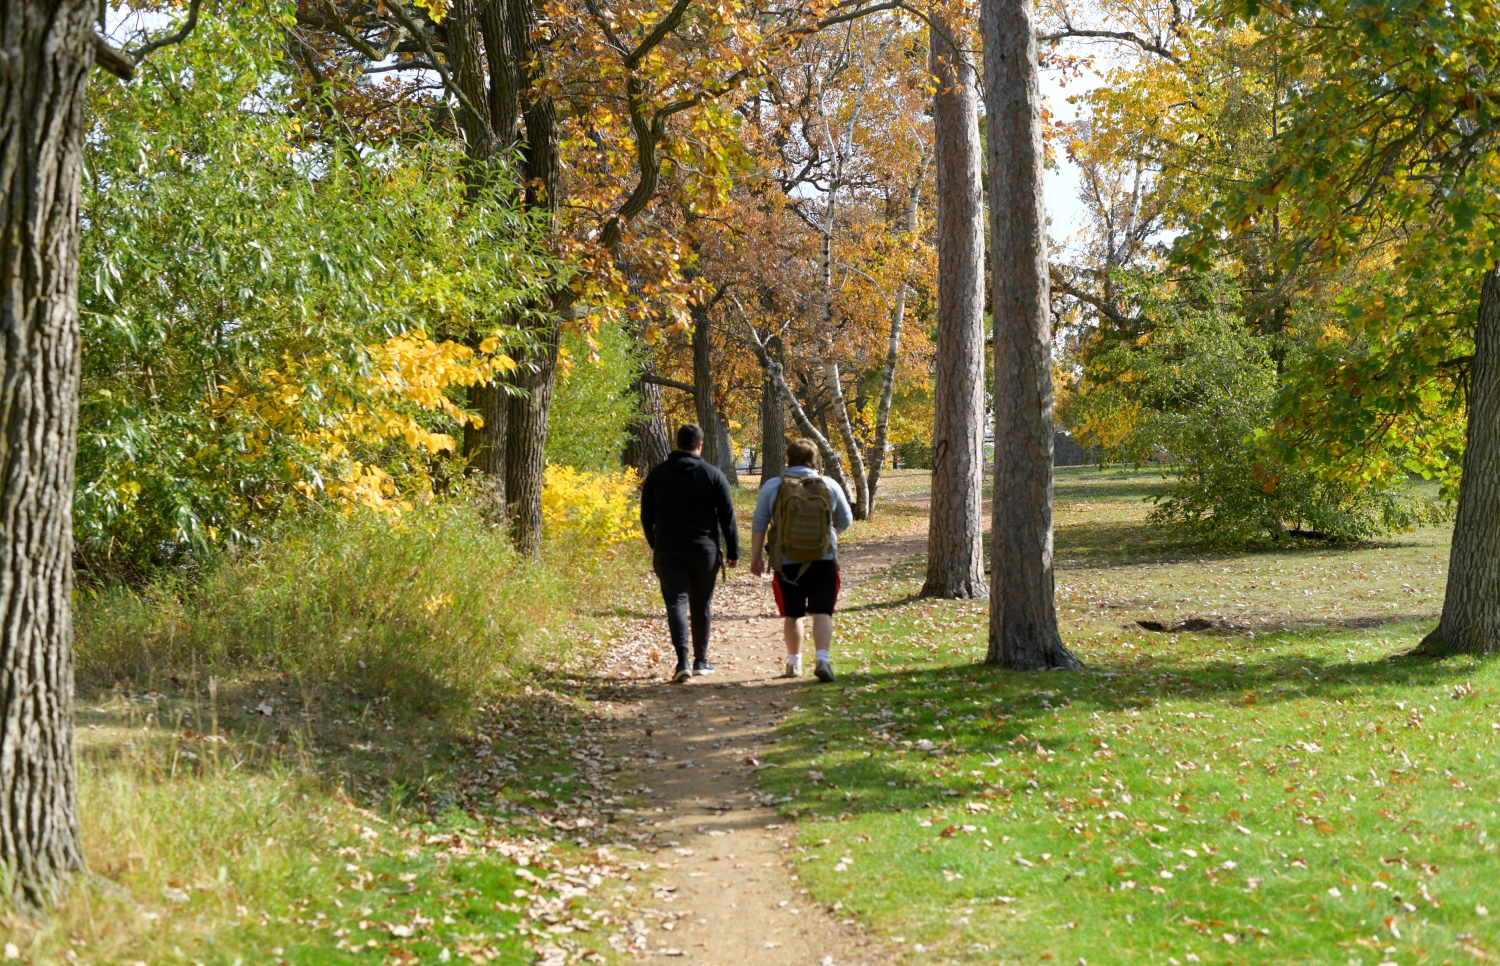 Two Bemidji State college students walking down a dirt path in the park